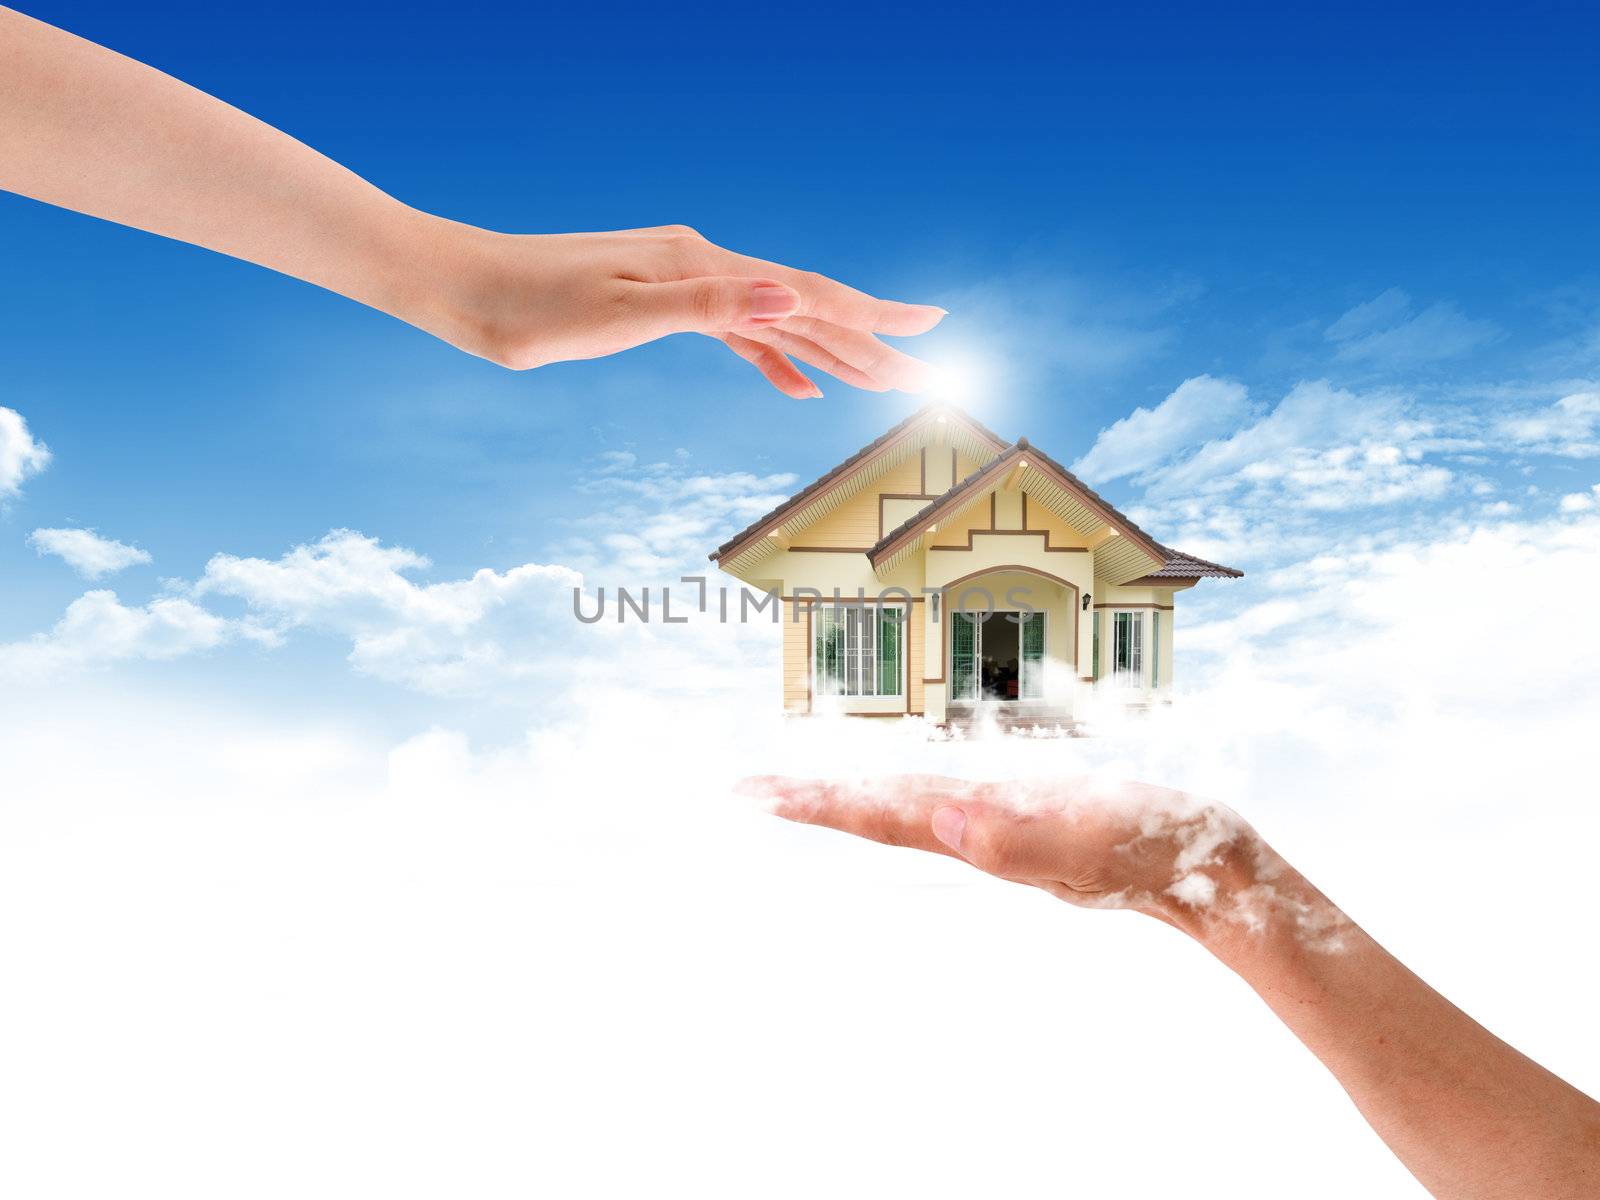 The House in the hands against the blue sky  by rufous